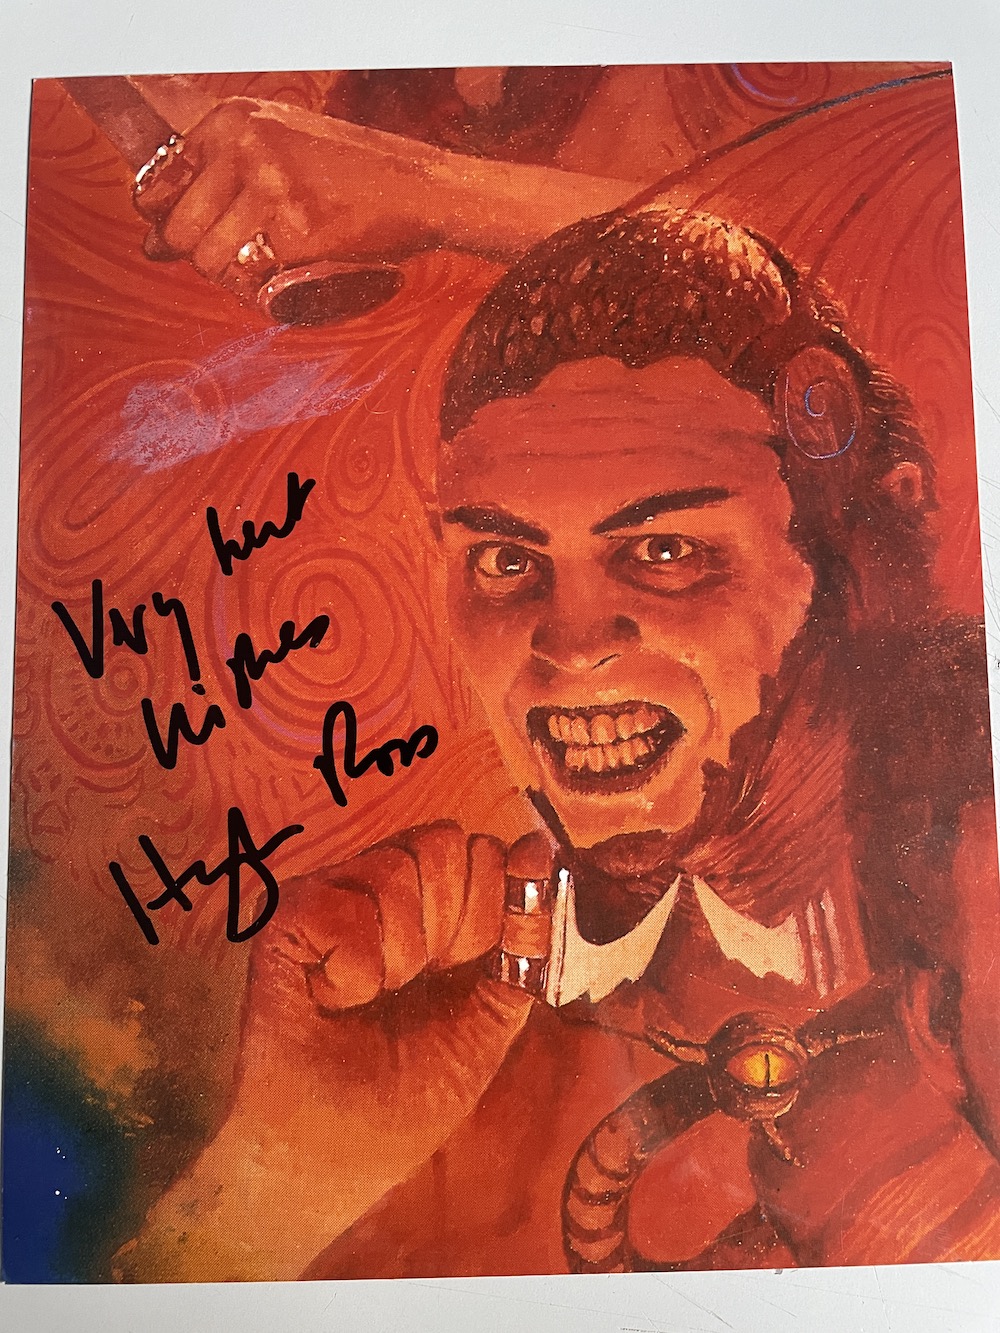 Hugh Ross Popular Actor Nightbreed 10x8 inch signed photo. Good condition. All autographs come